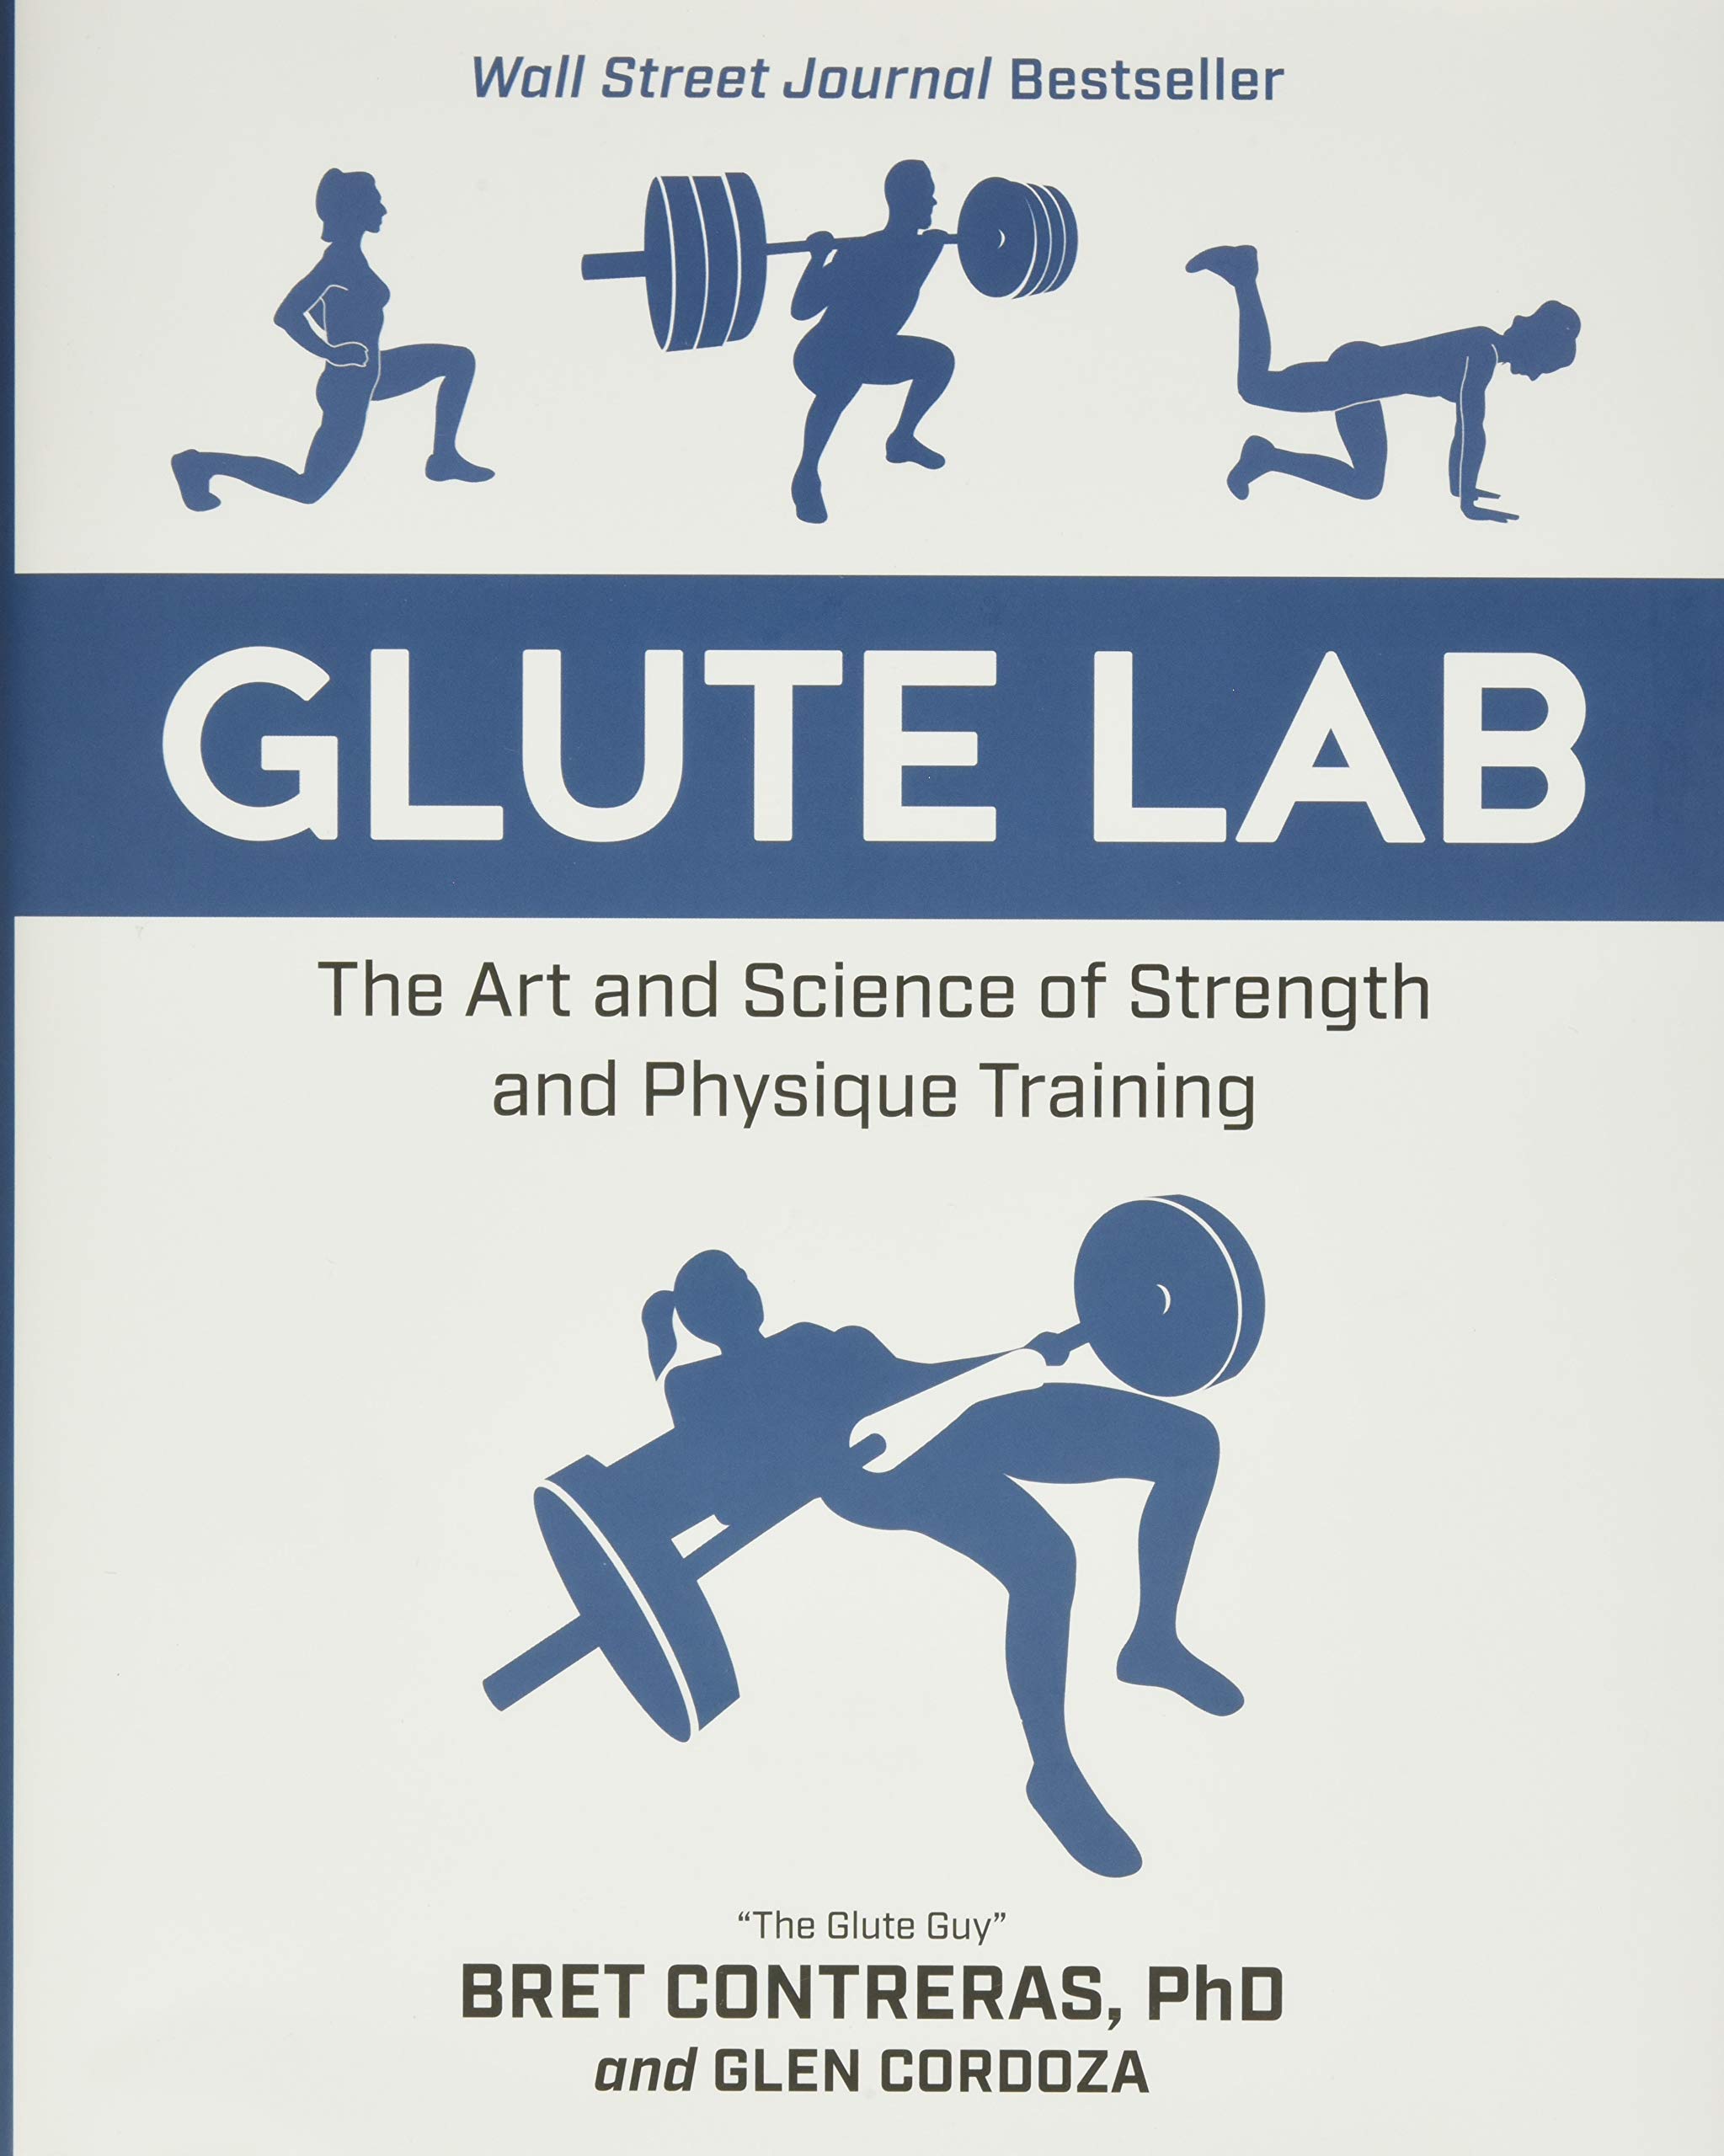 The 7 Best Workout Books of 2021 - Book Glute Lab by Bret Contreras & Glen Cordoza